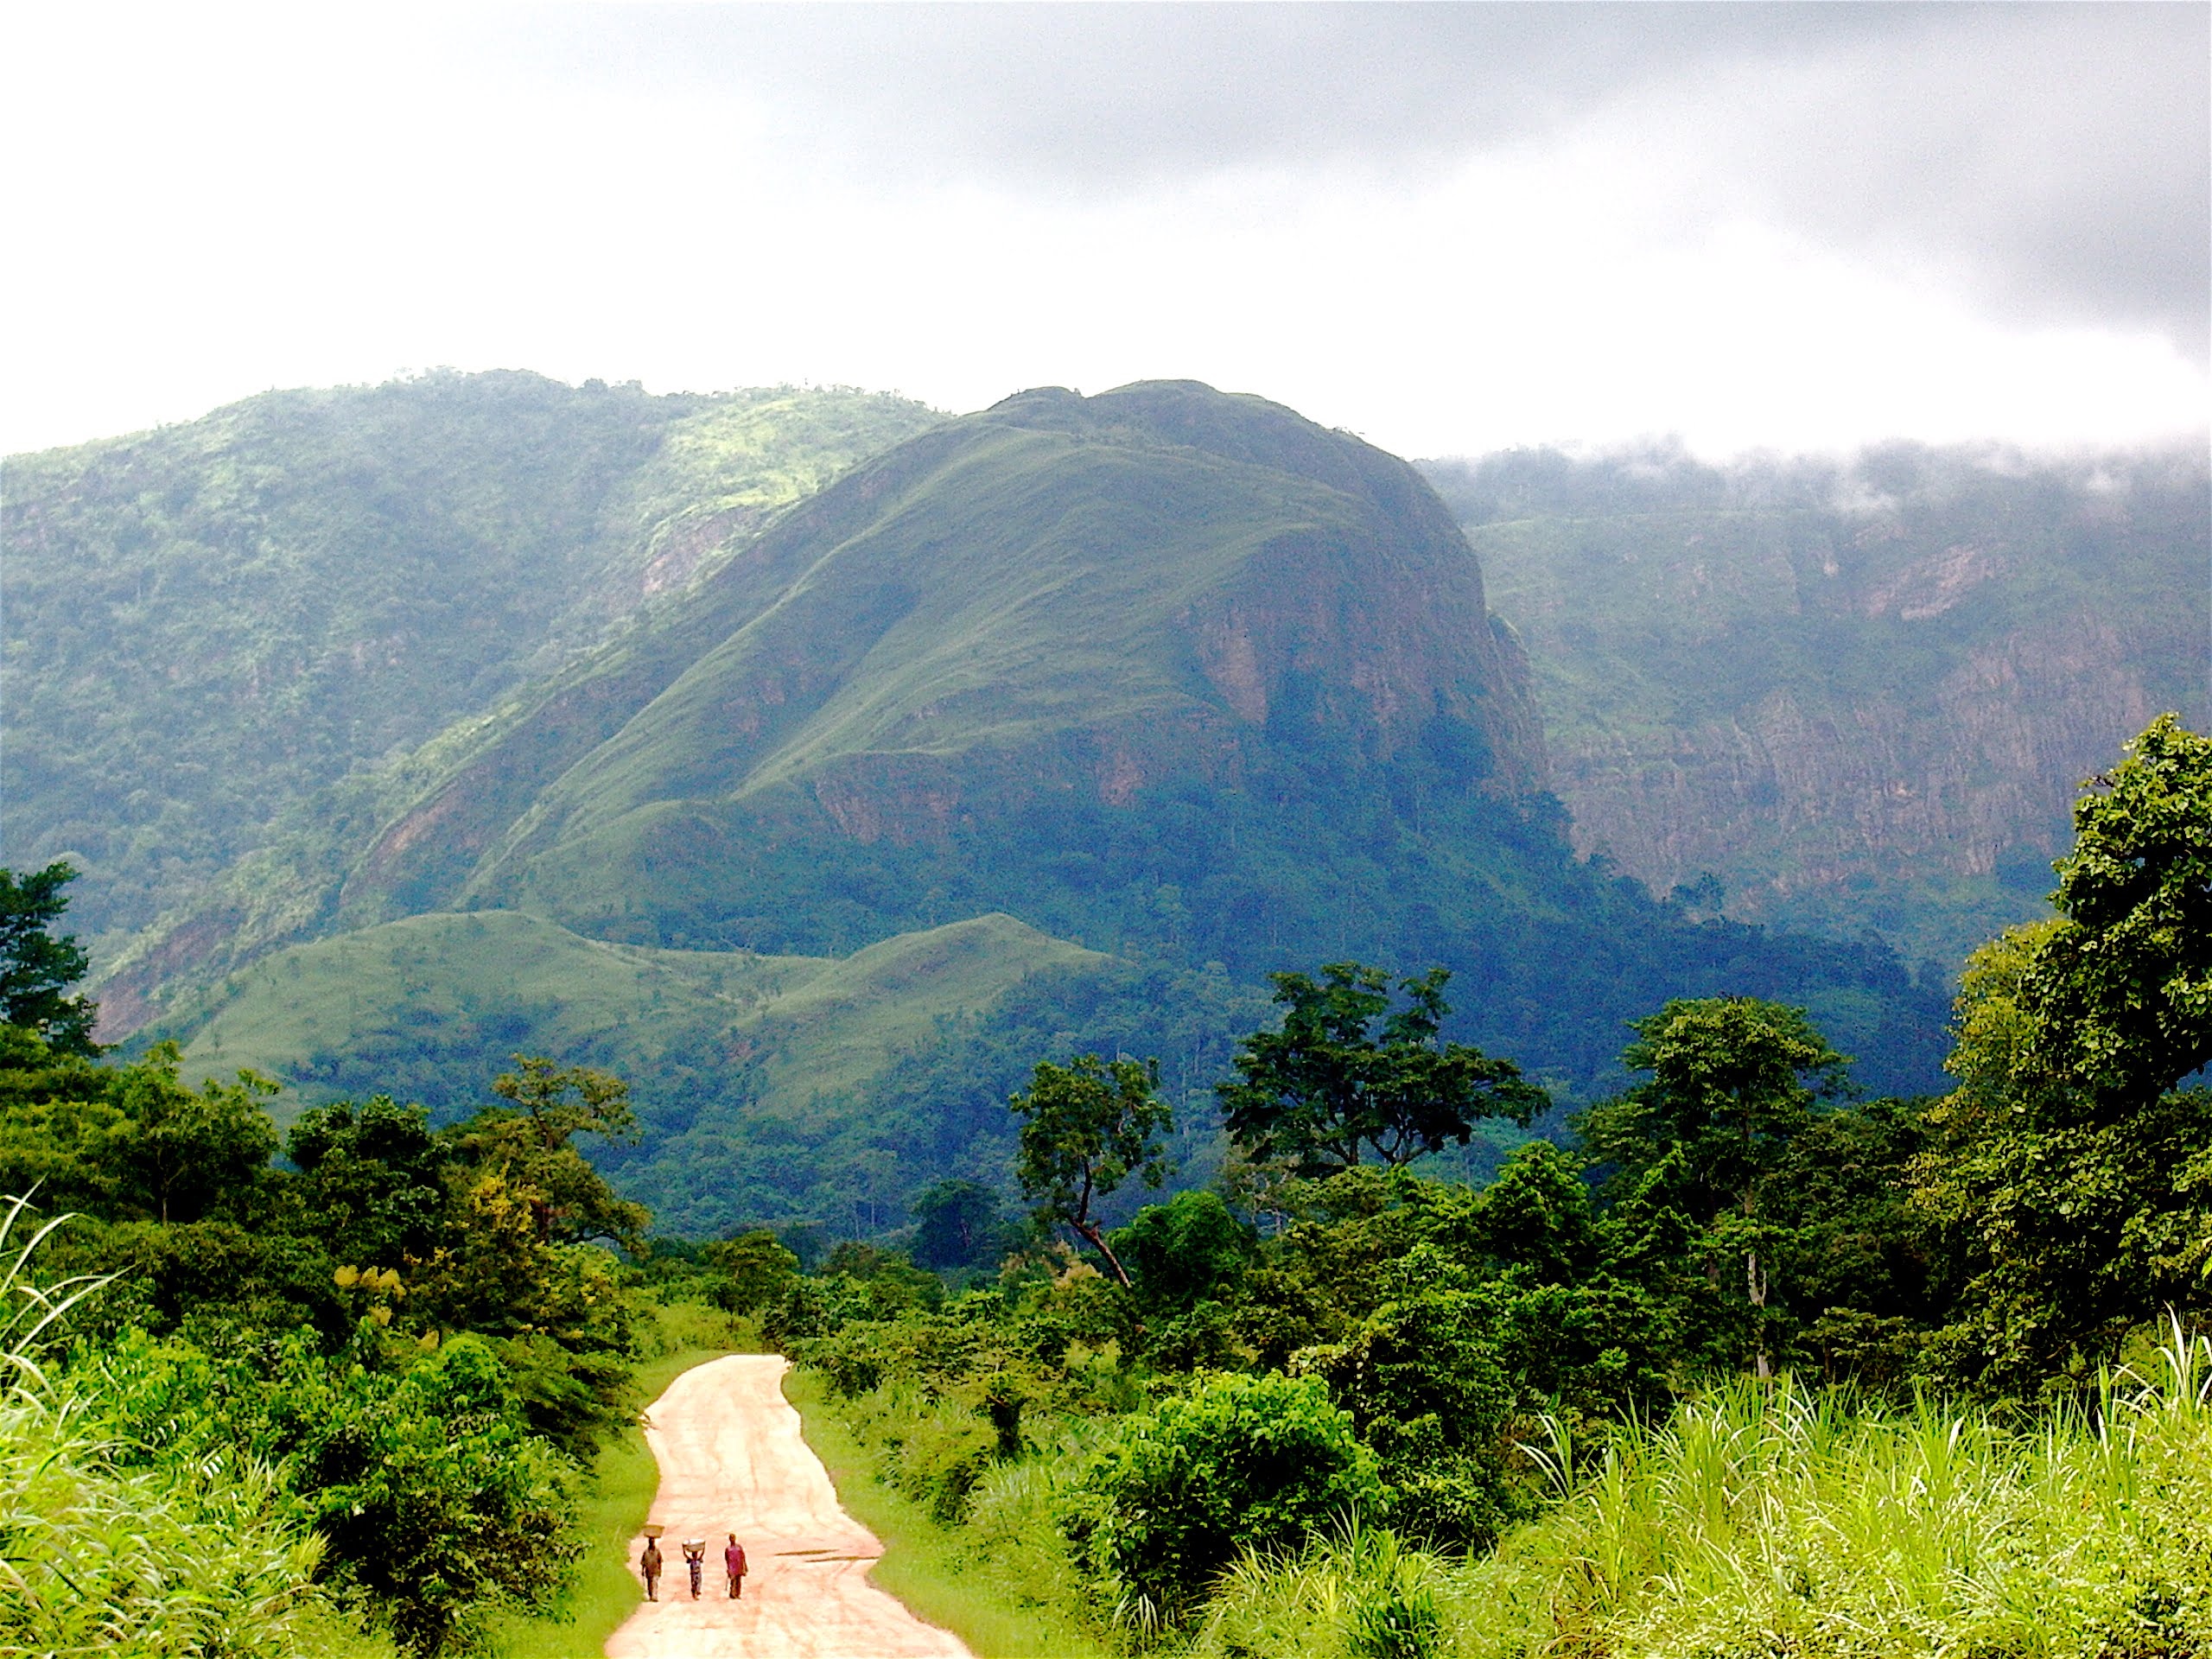 Mountain view At the border of Ghana and Togo